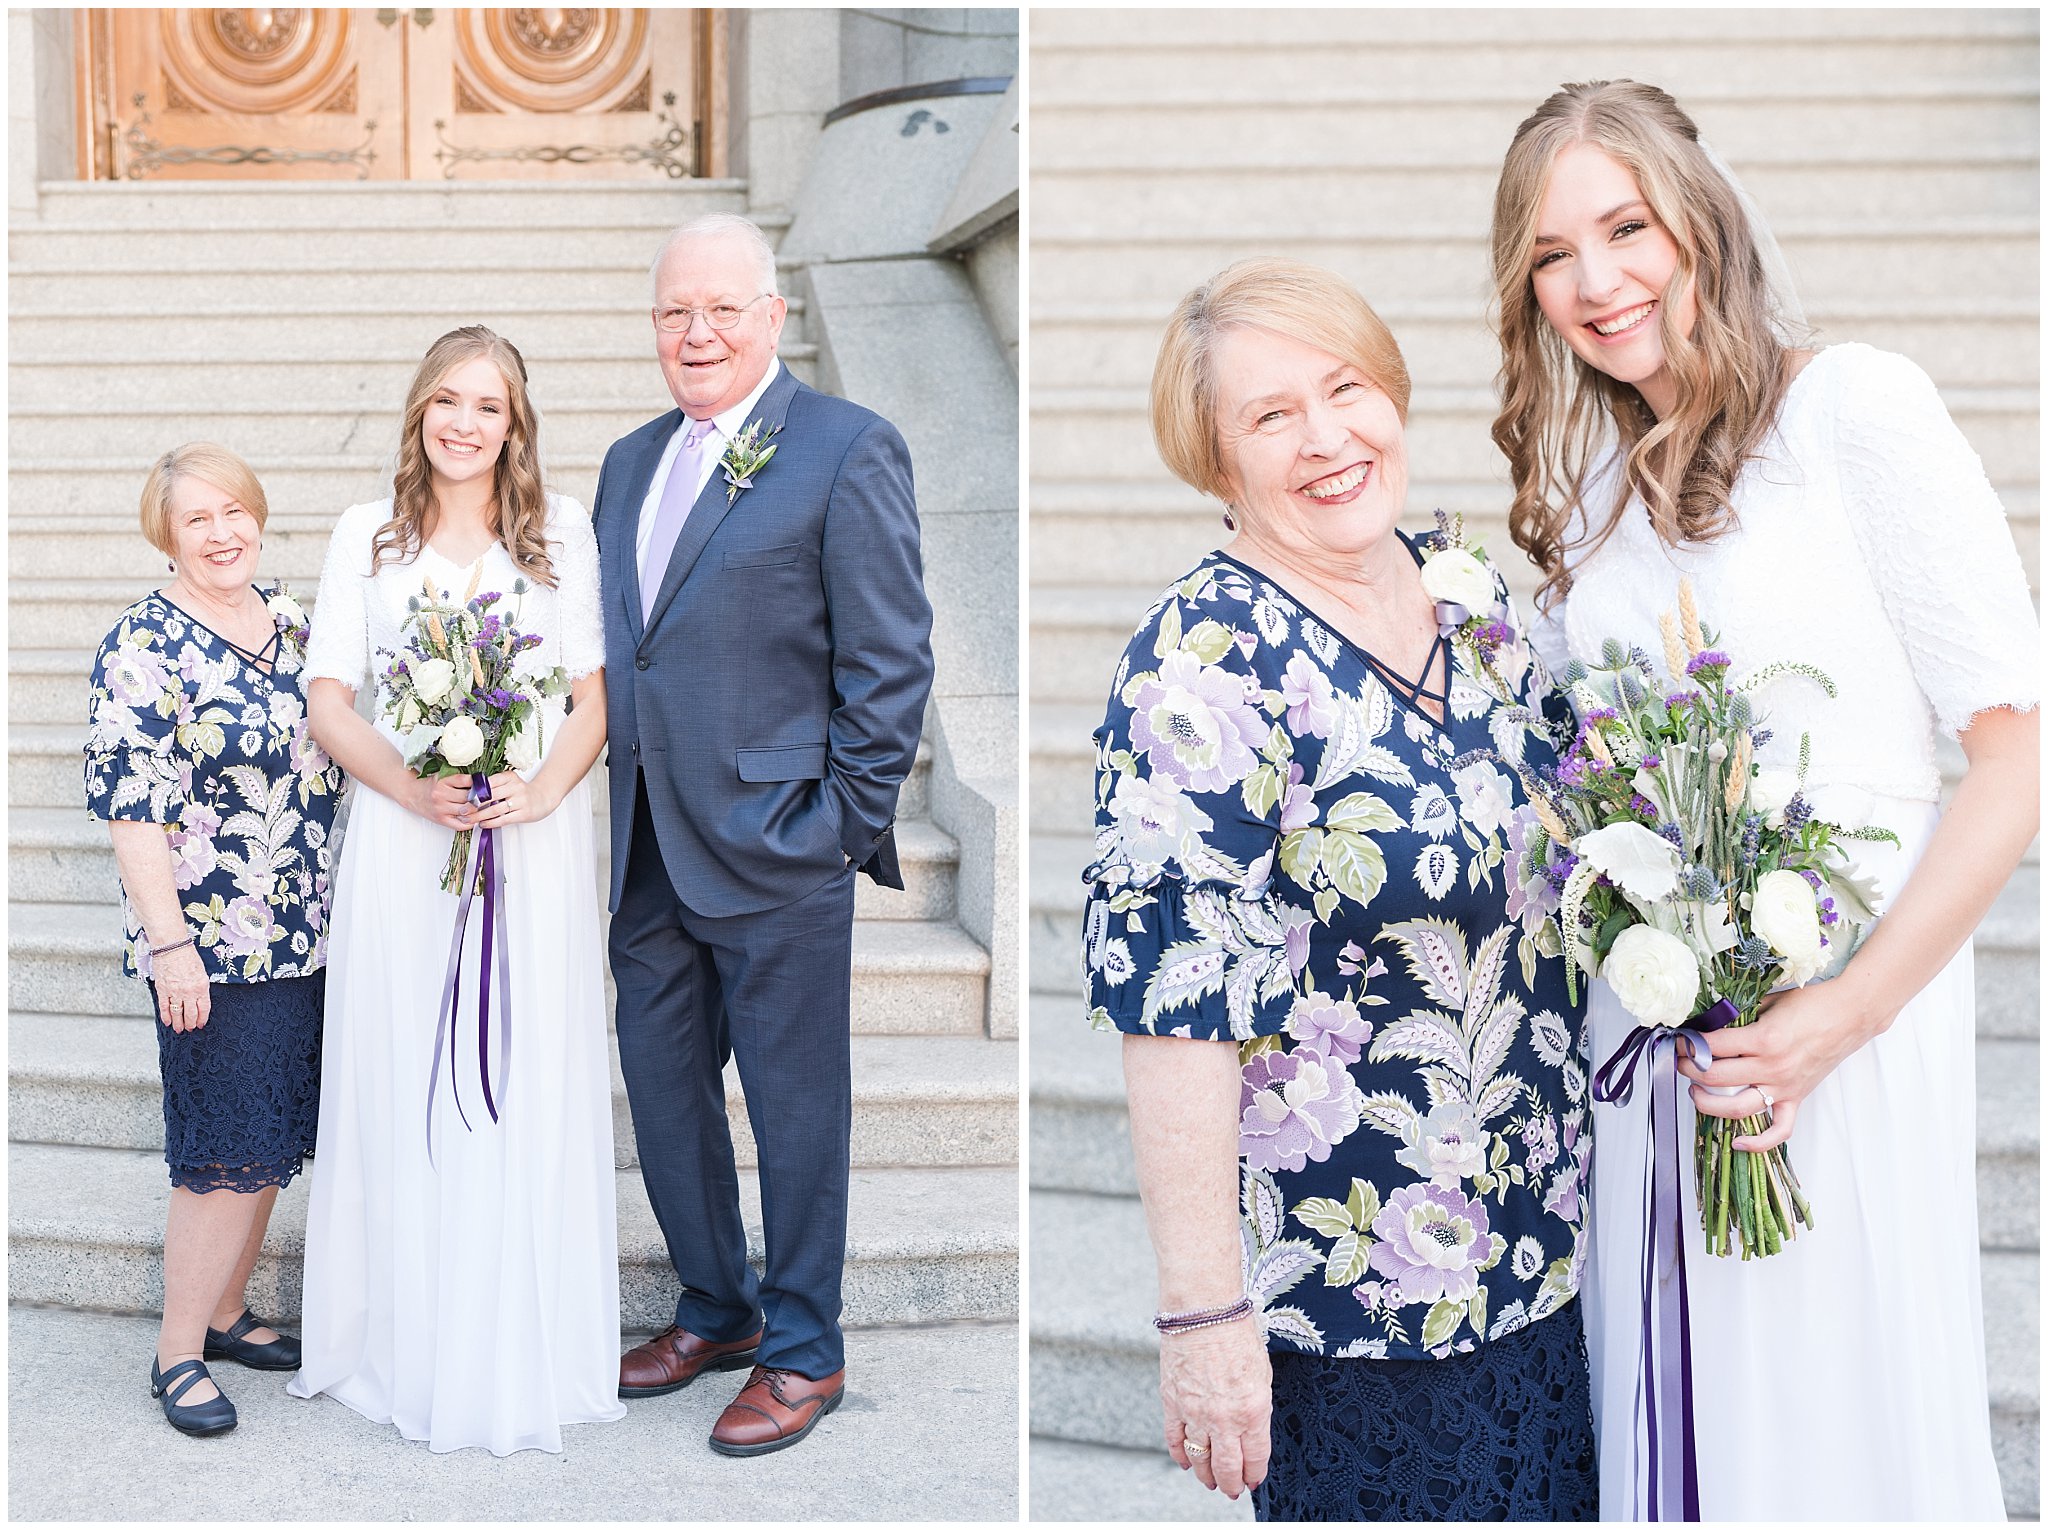 Fun and candid family photos at the temple during wedding | Salt Lake Temple Wedding and Clearfield City Hall Reception | Utah Wedding Photographers | Jessie and Dallin Photography